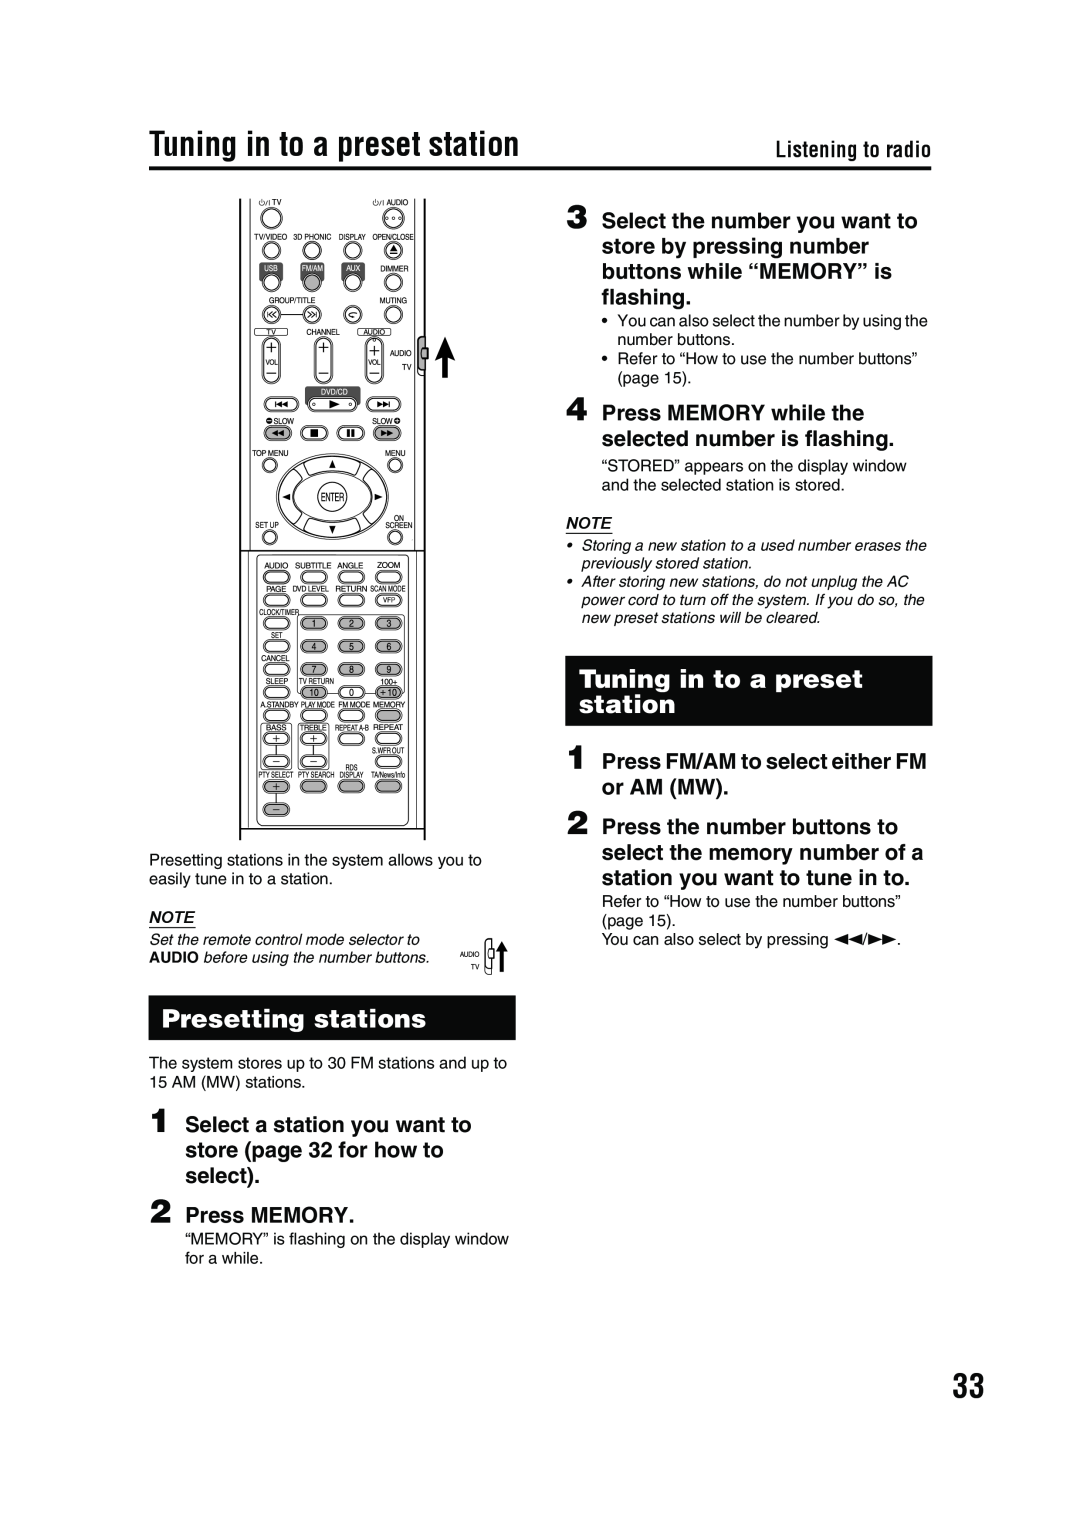 JVC GVT0143-008A manual Tuning in to a preset station, Presetting stations, Press MEMORY, Listening to radio 